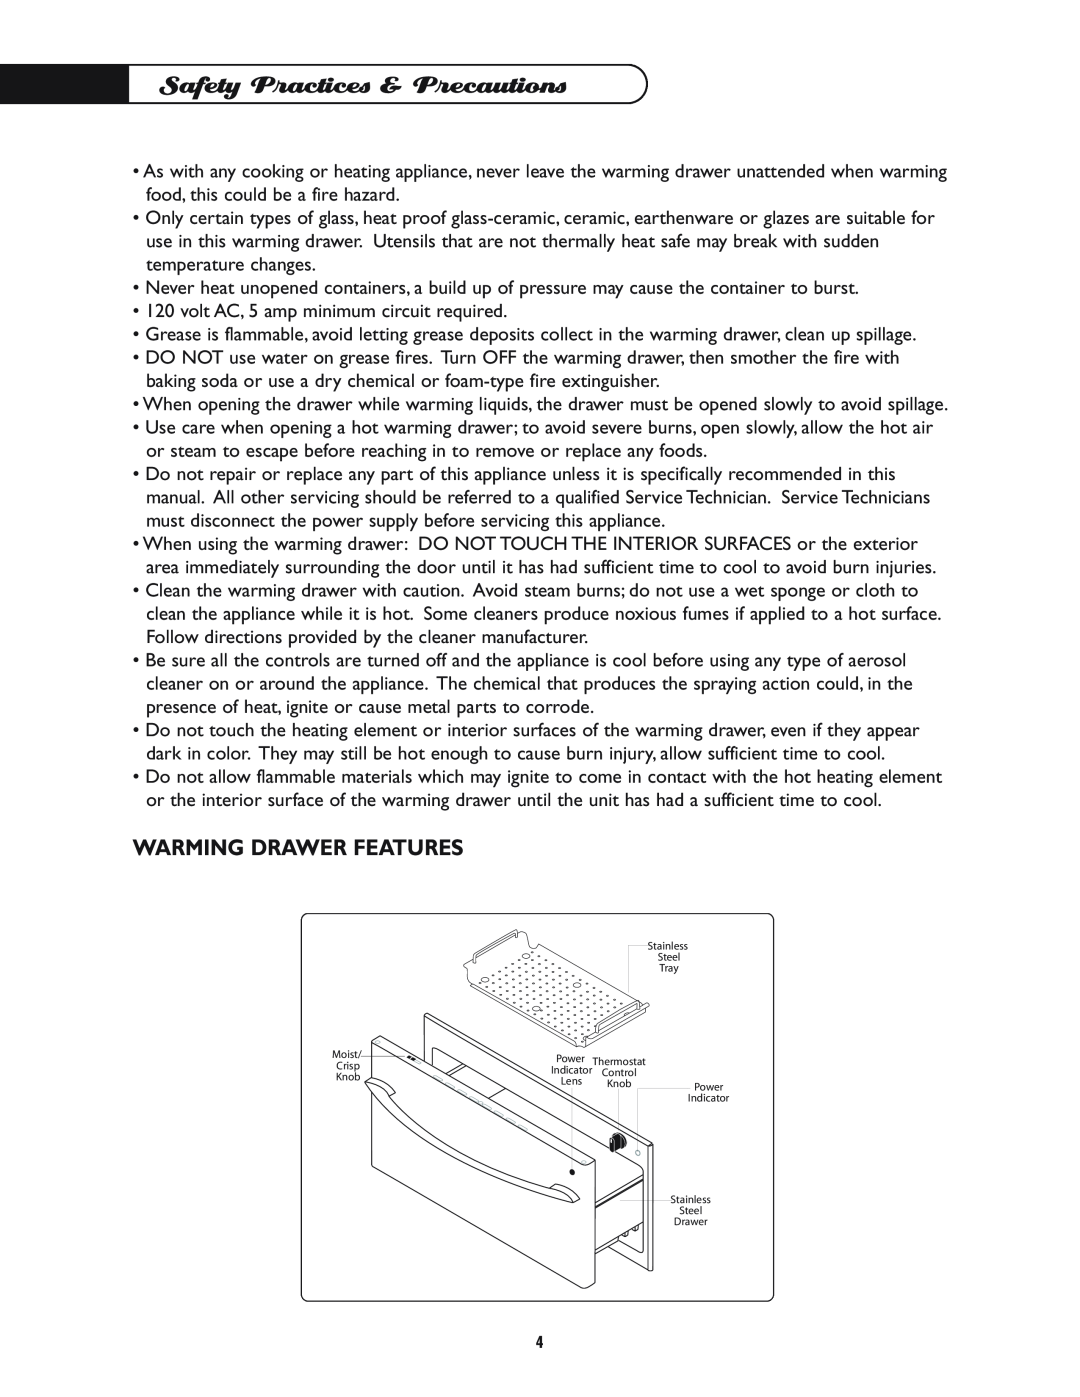 DCS WD-30-BL manual Warming Drawer Features, Safety Practices & Precautions 